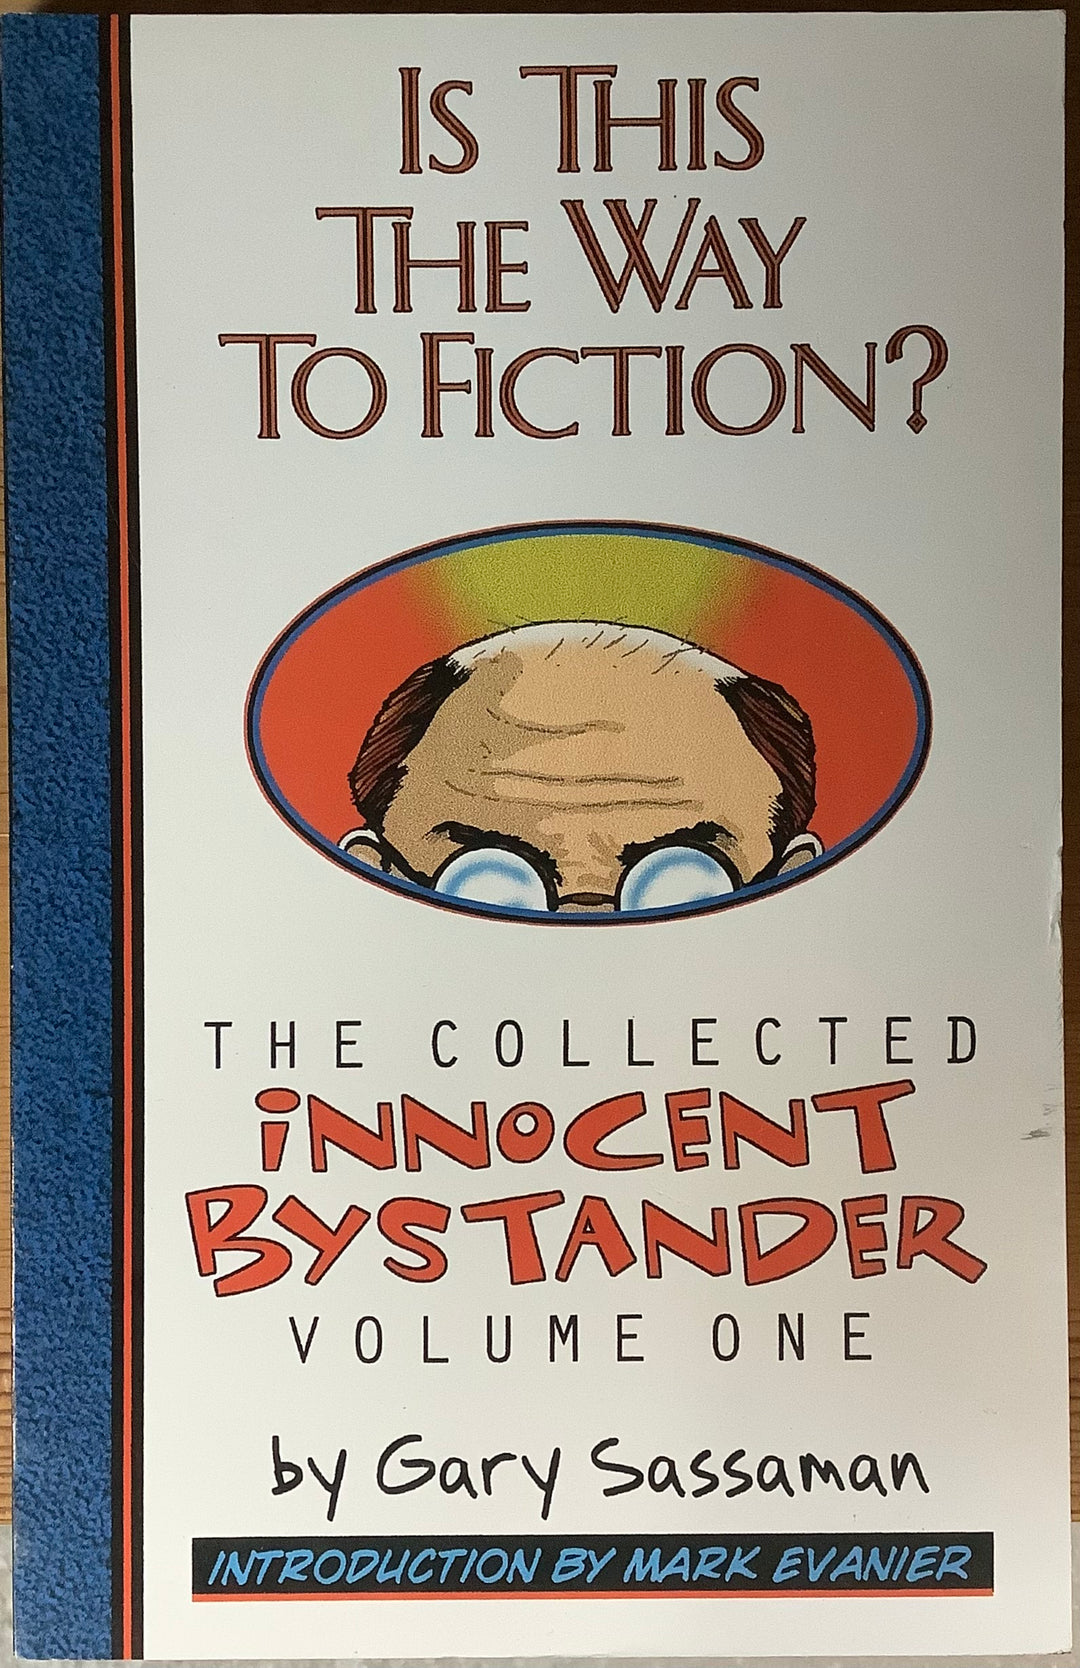 The Collected Innocent Bystander Volume One Graphic Novel OXS-04